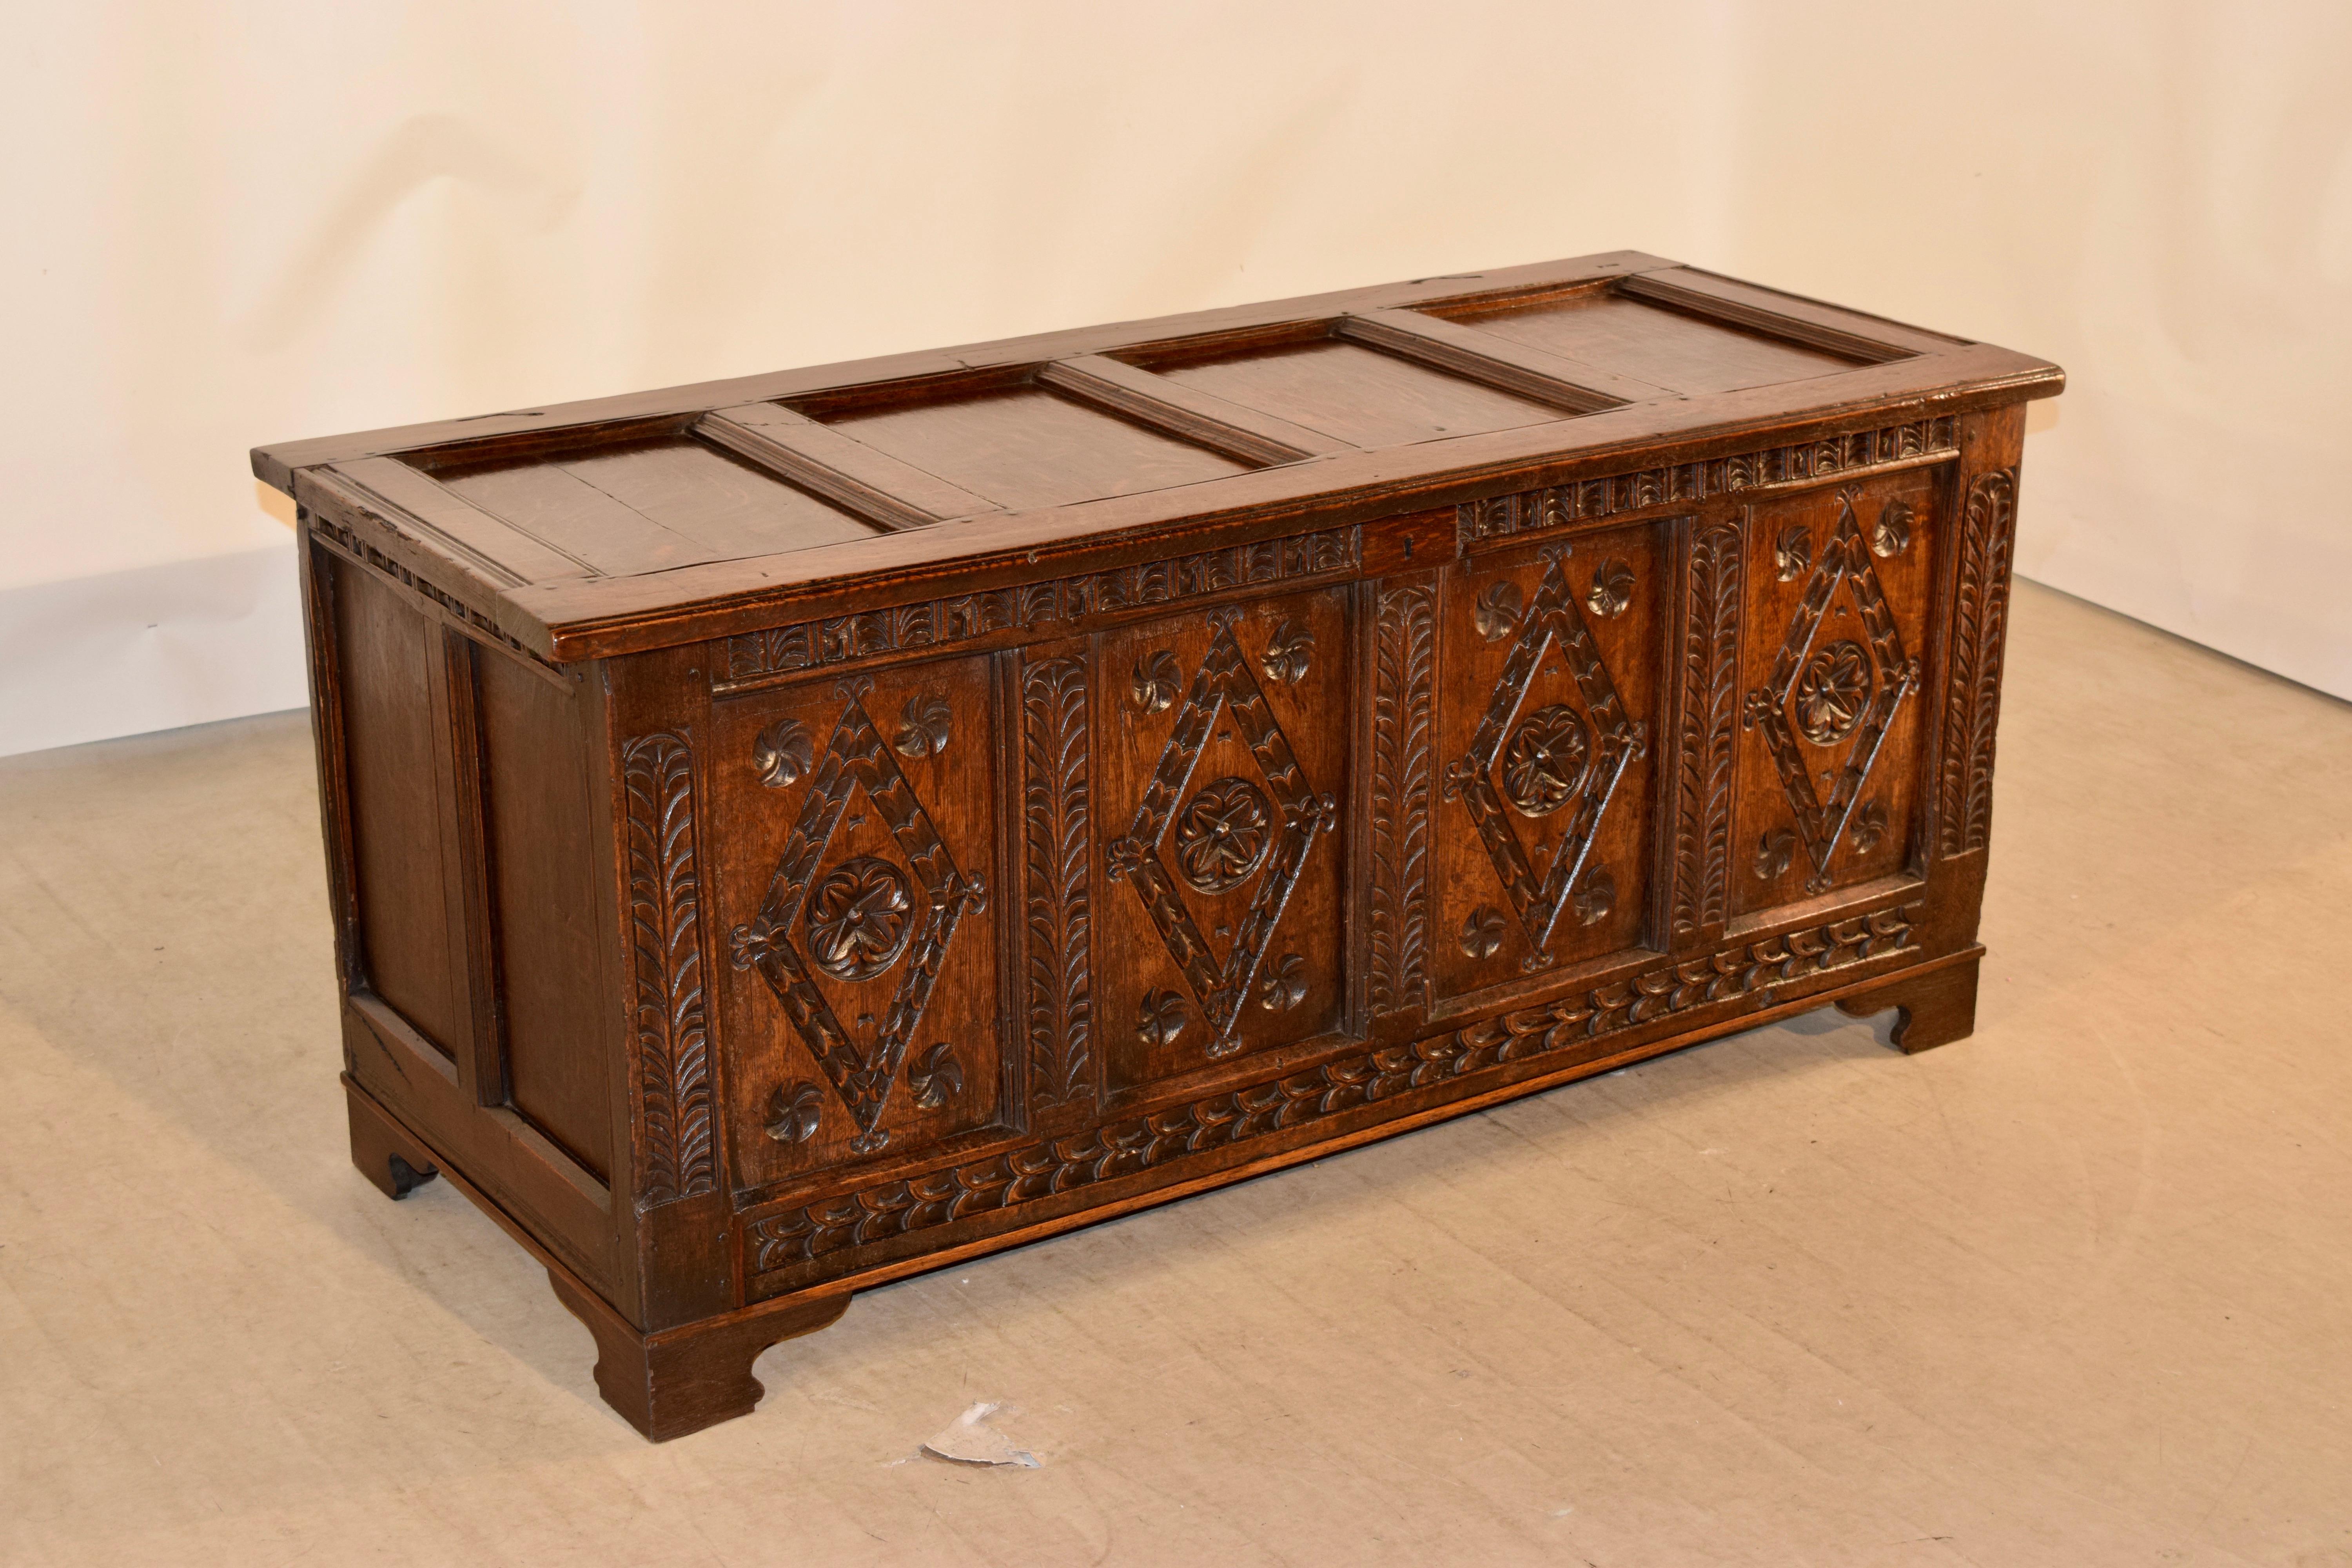 Period William and Mary oak blanket chest from England with four panels in the top, following down to sides with two panels, and the front of the chest with four hand carved decorated panels and surrounded by hand carved decoration on all of the